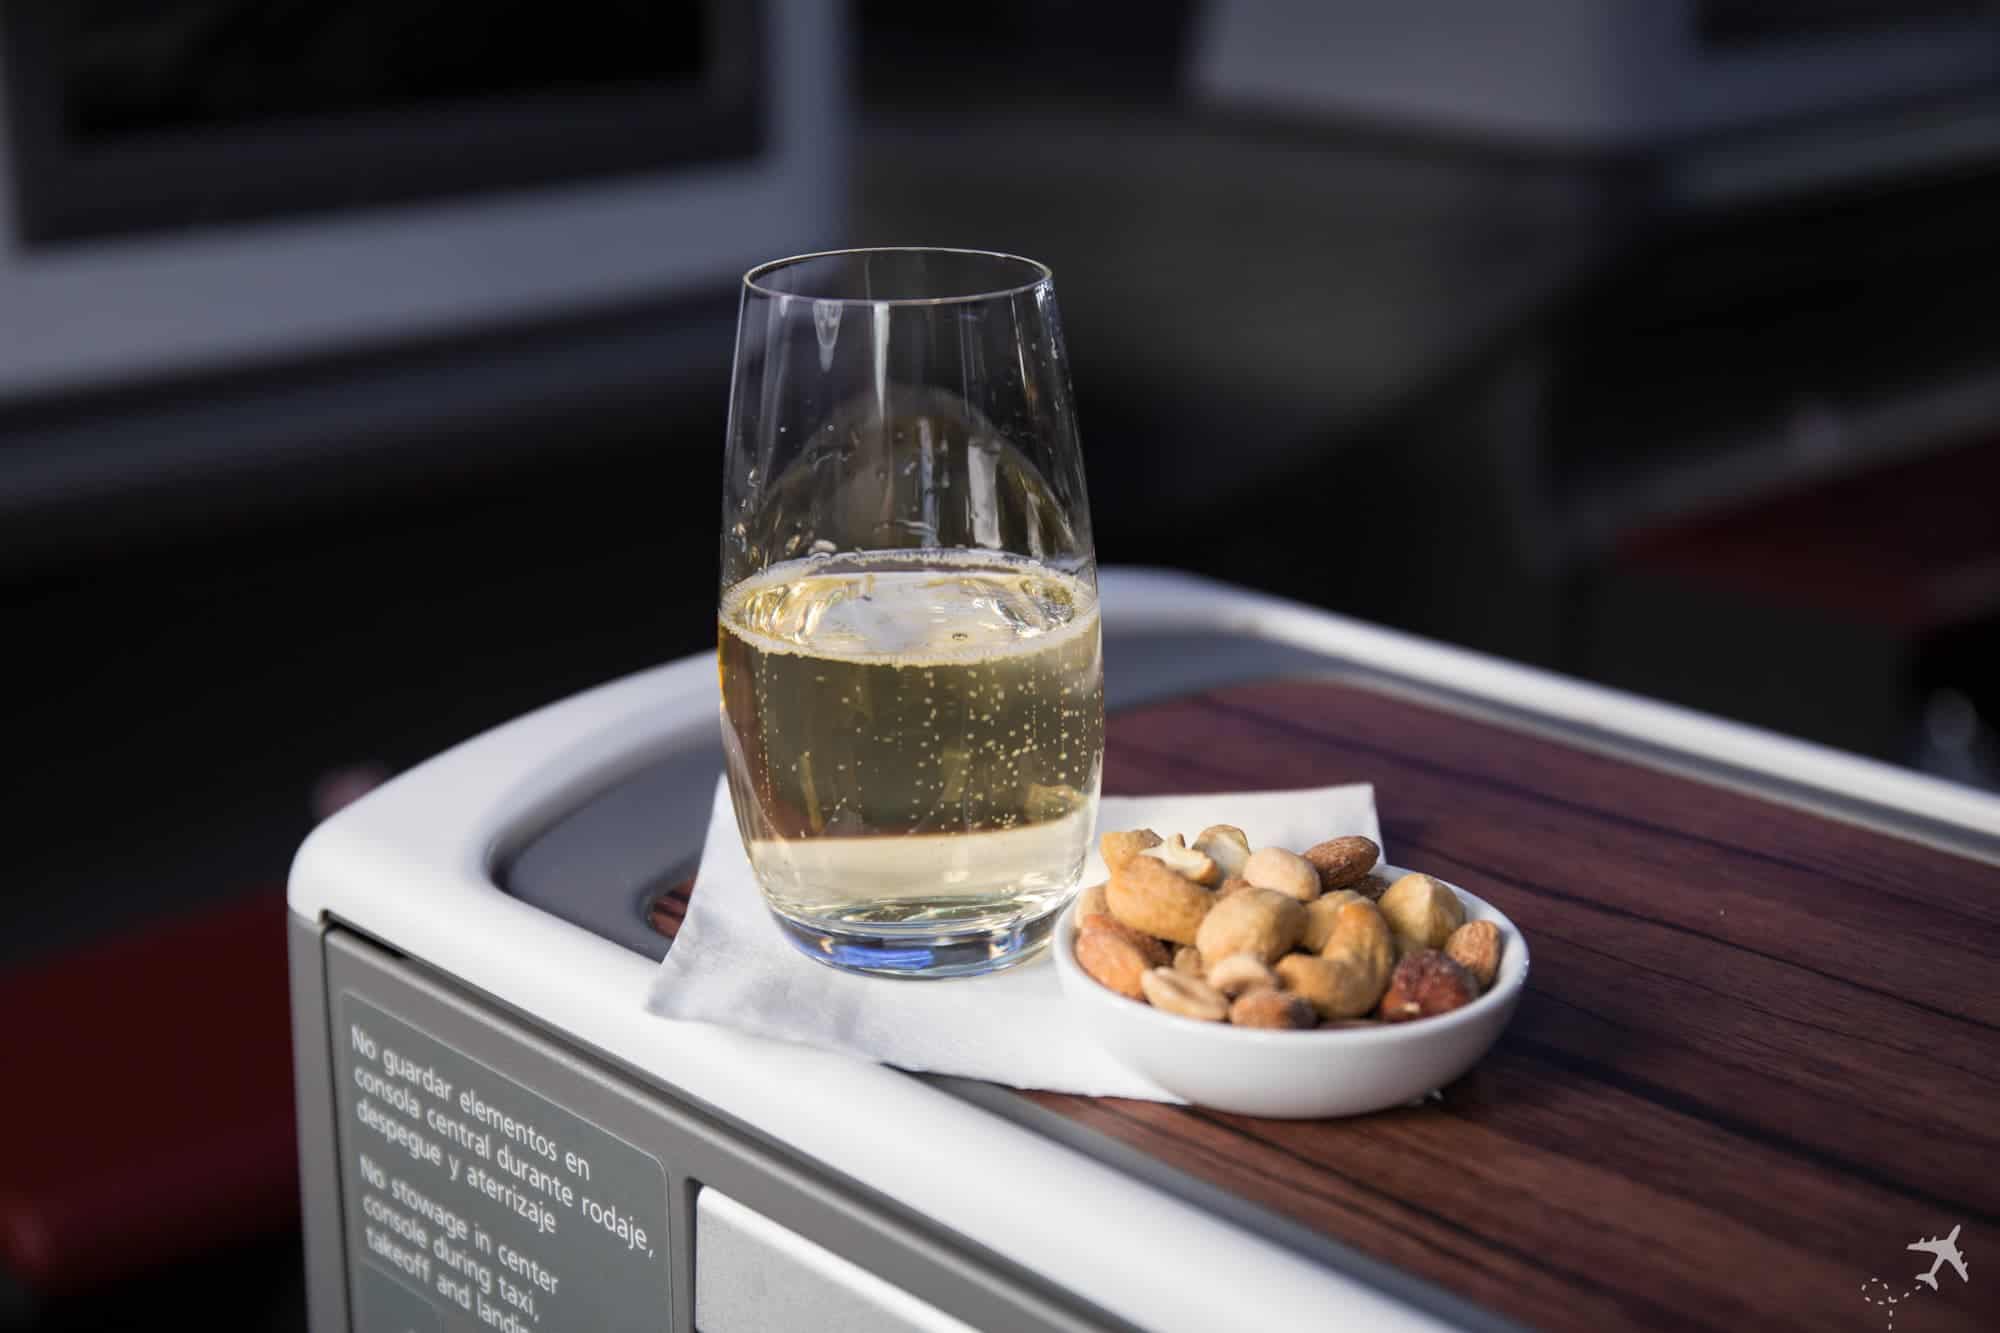 LATAM Boeing 787 Business Class Welcome Drink